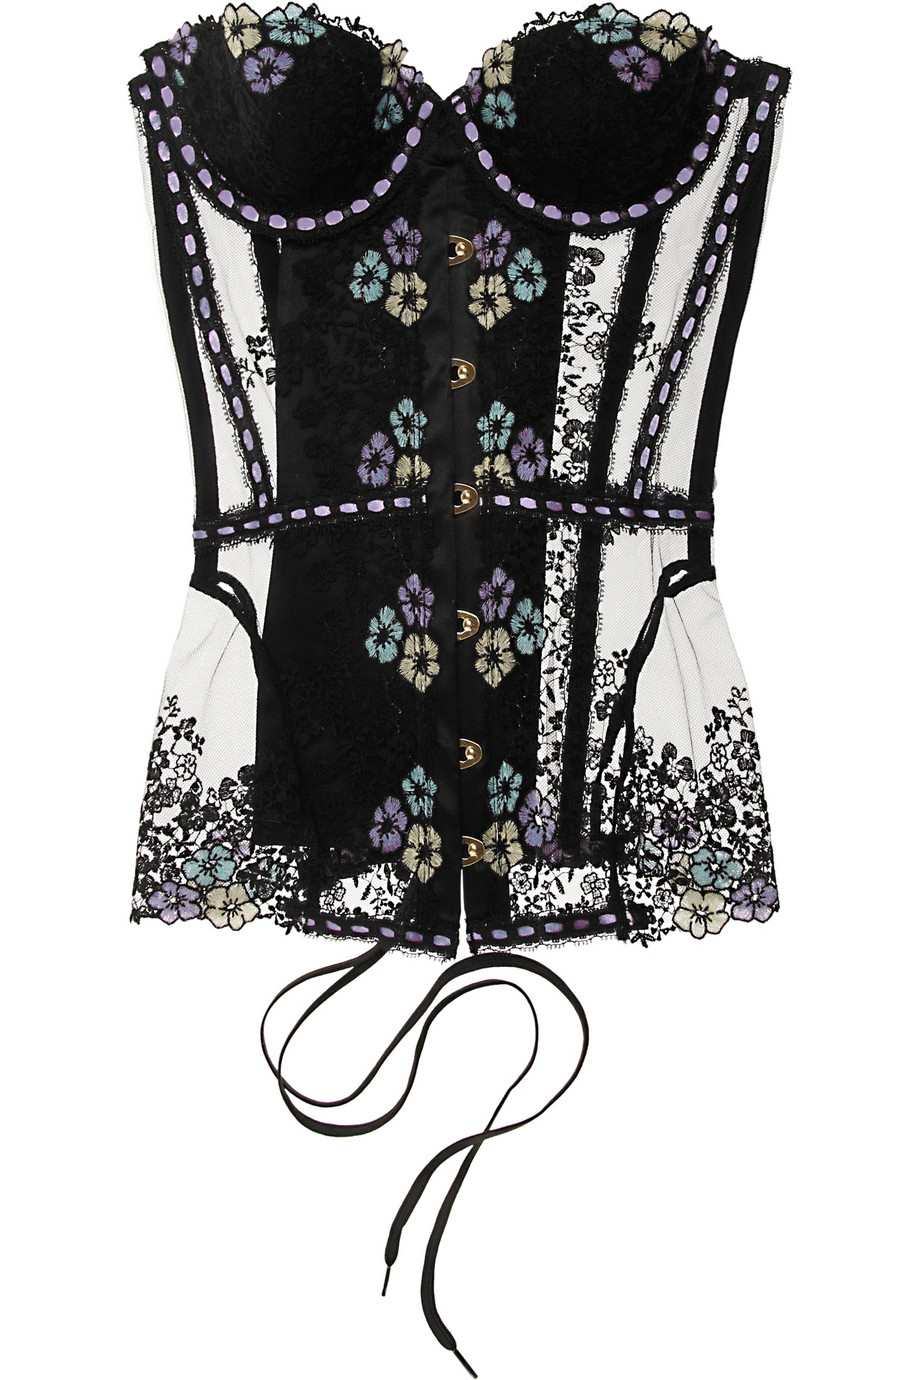 Agent Provocateur Petunia Floral-Embroidered Stretch-Tulle Corset in ...